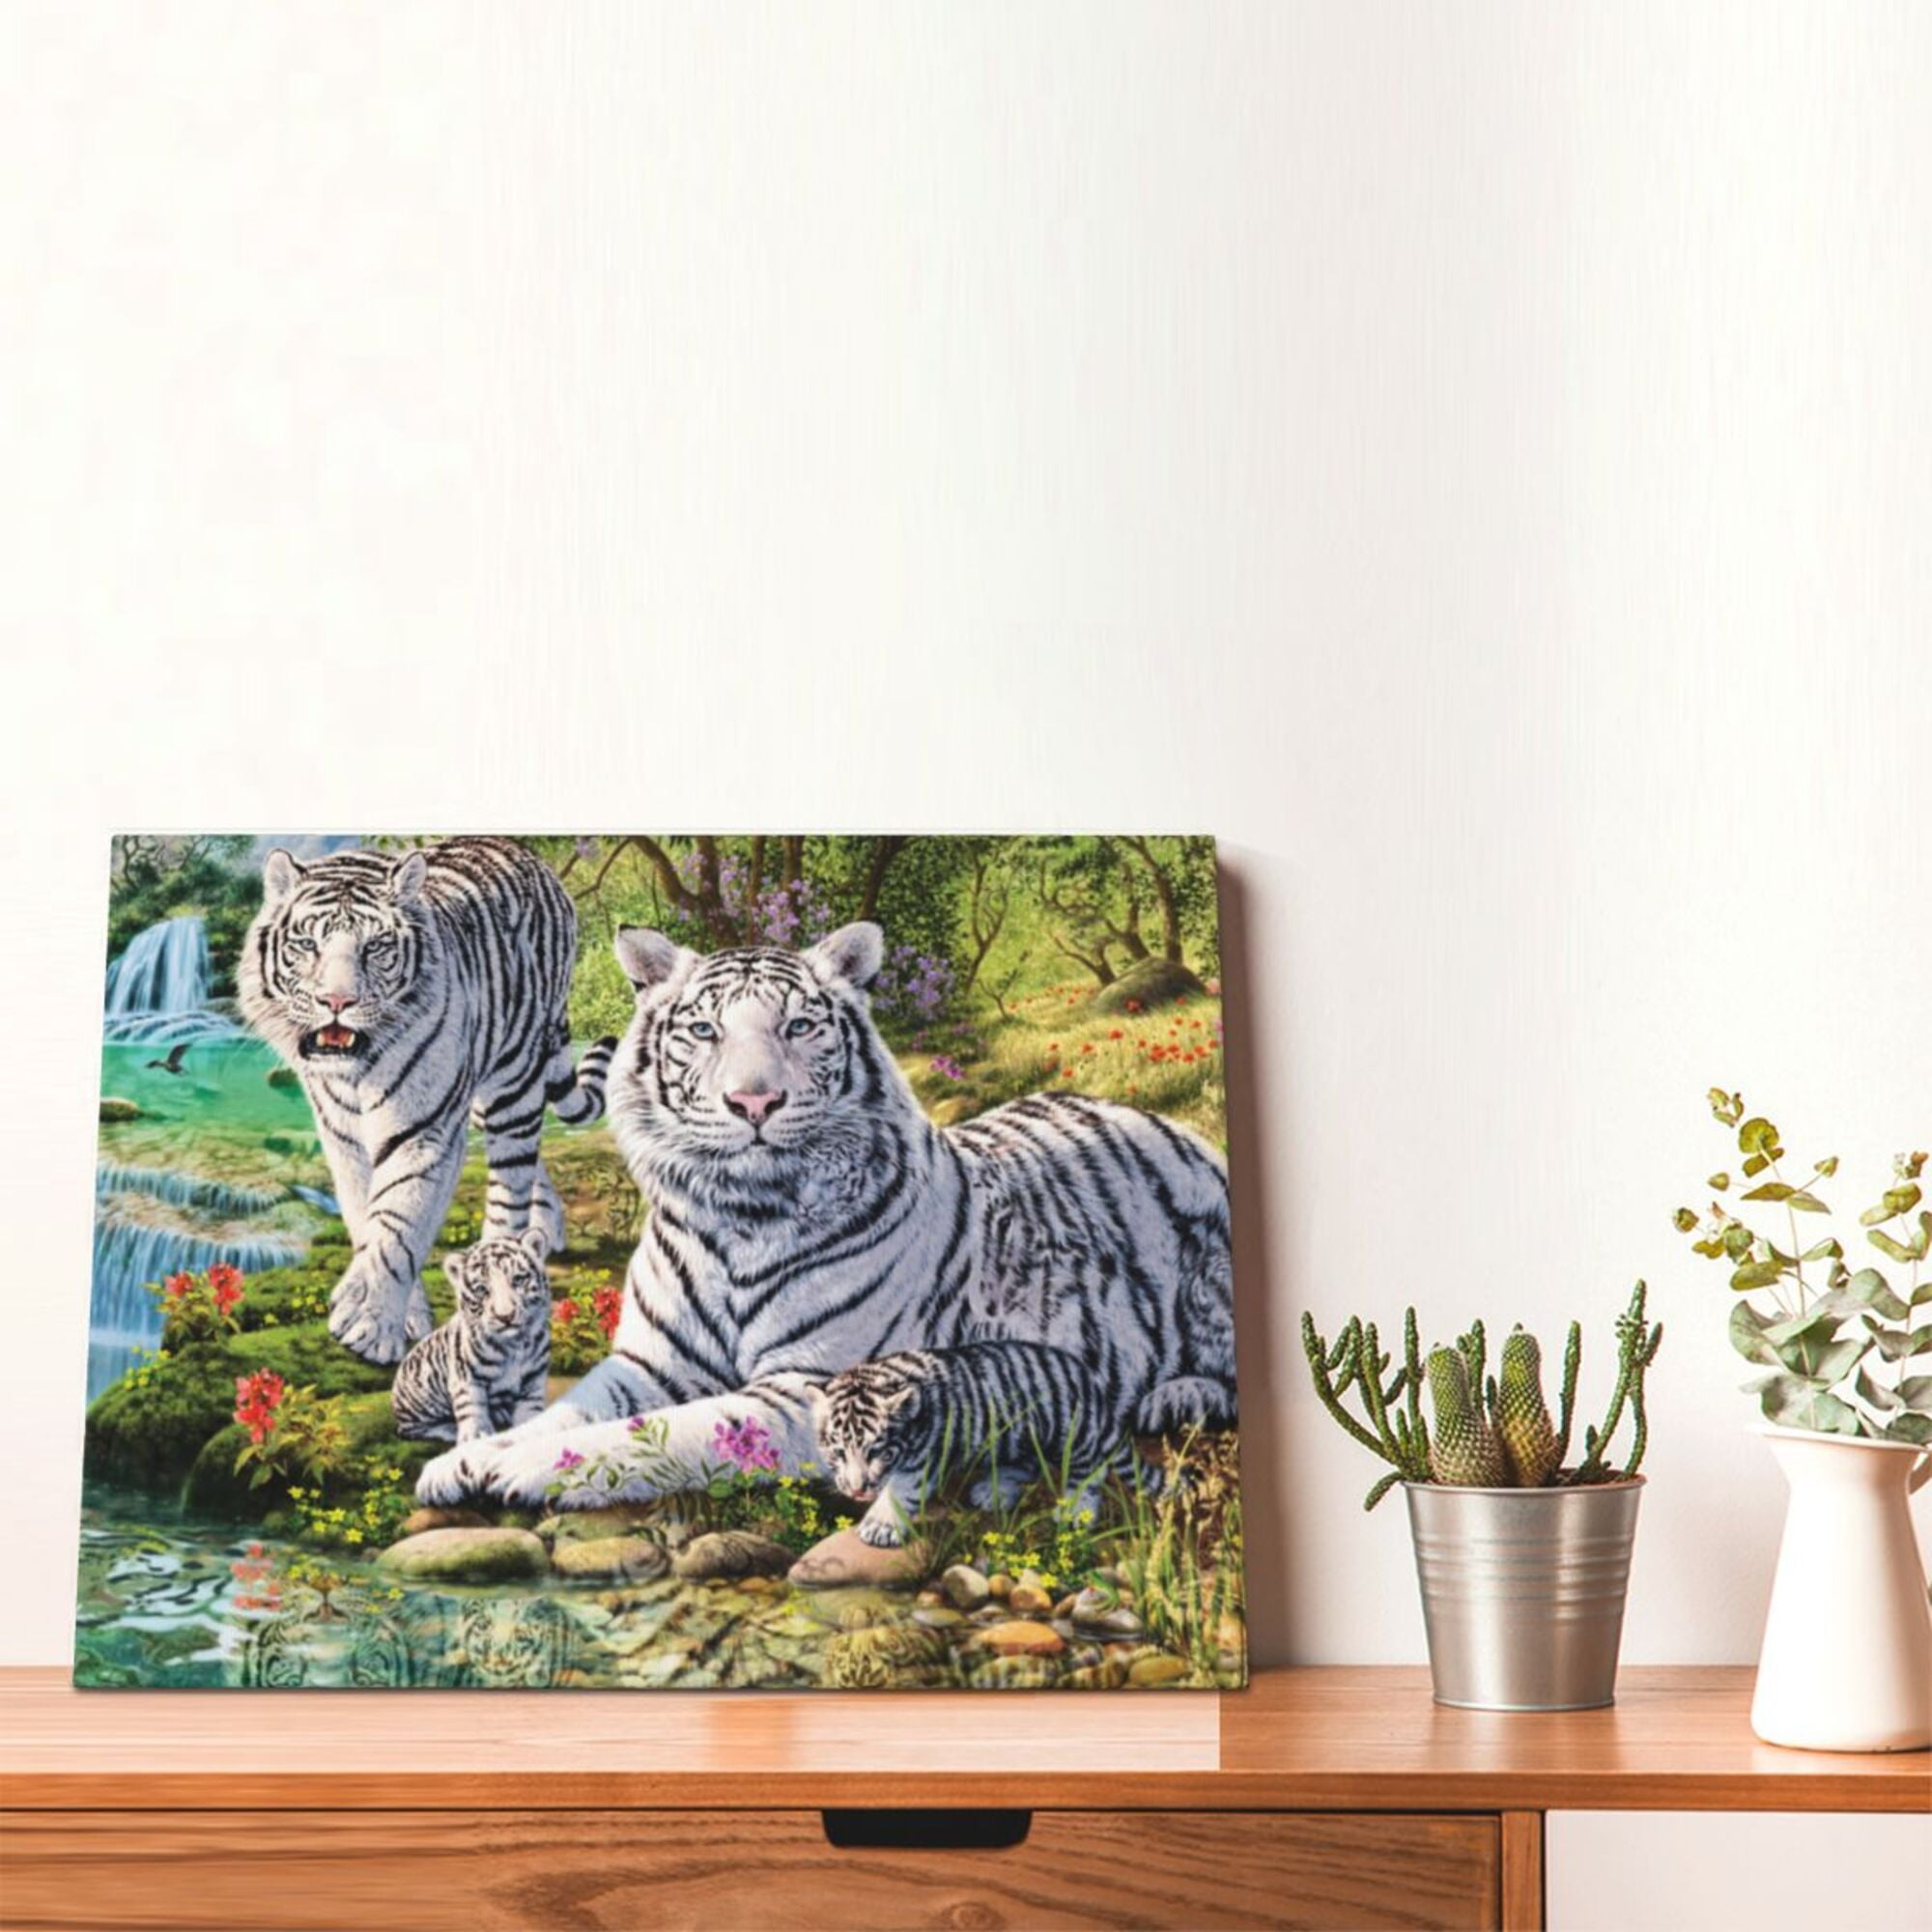 Decor White Tiger Painting 12x16in Canvas Decor Bathroom Room Bedroom Framed Wall Living Bathroom Decorations Modern For Artwork